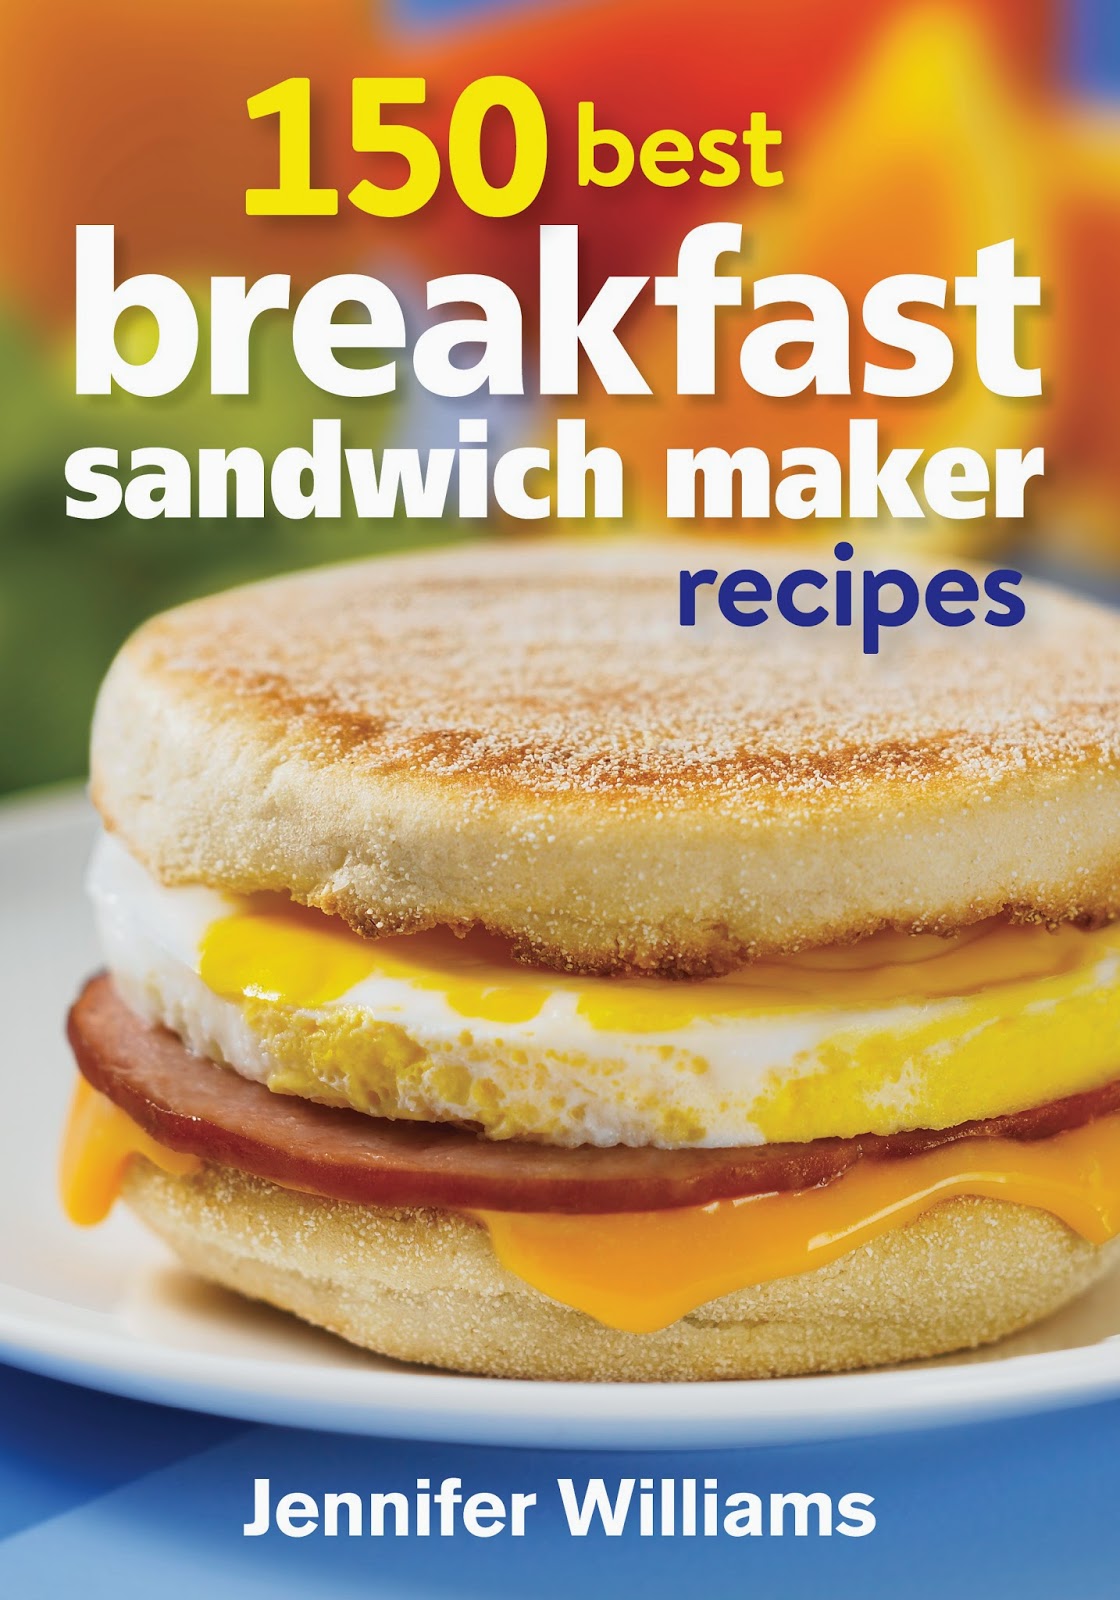 Bunny and Brandy's Brunchtime Blog: Giveaway and 150 Best Breakfast  Sandwich Maker Recipes Review!